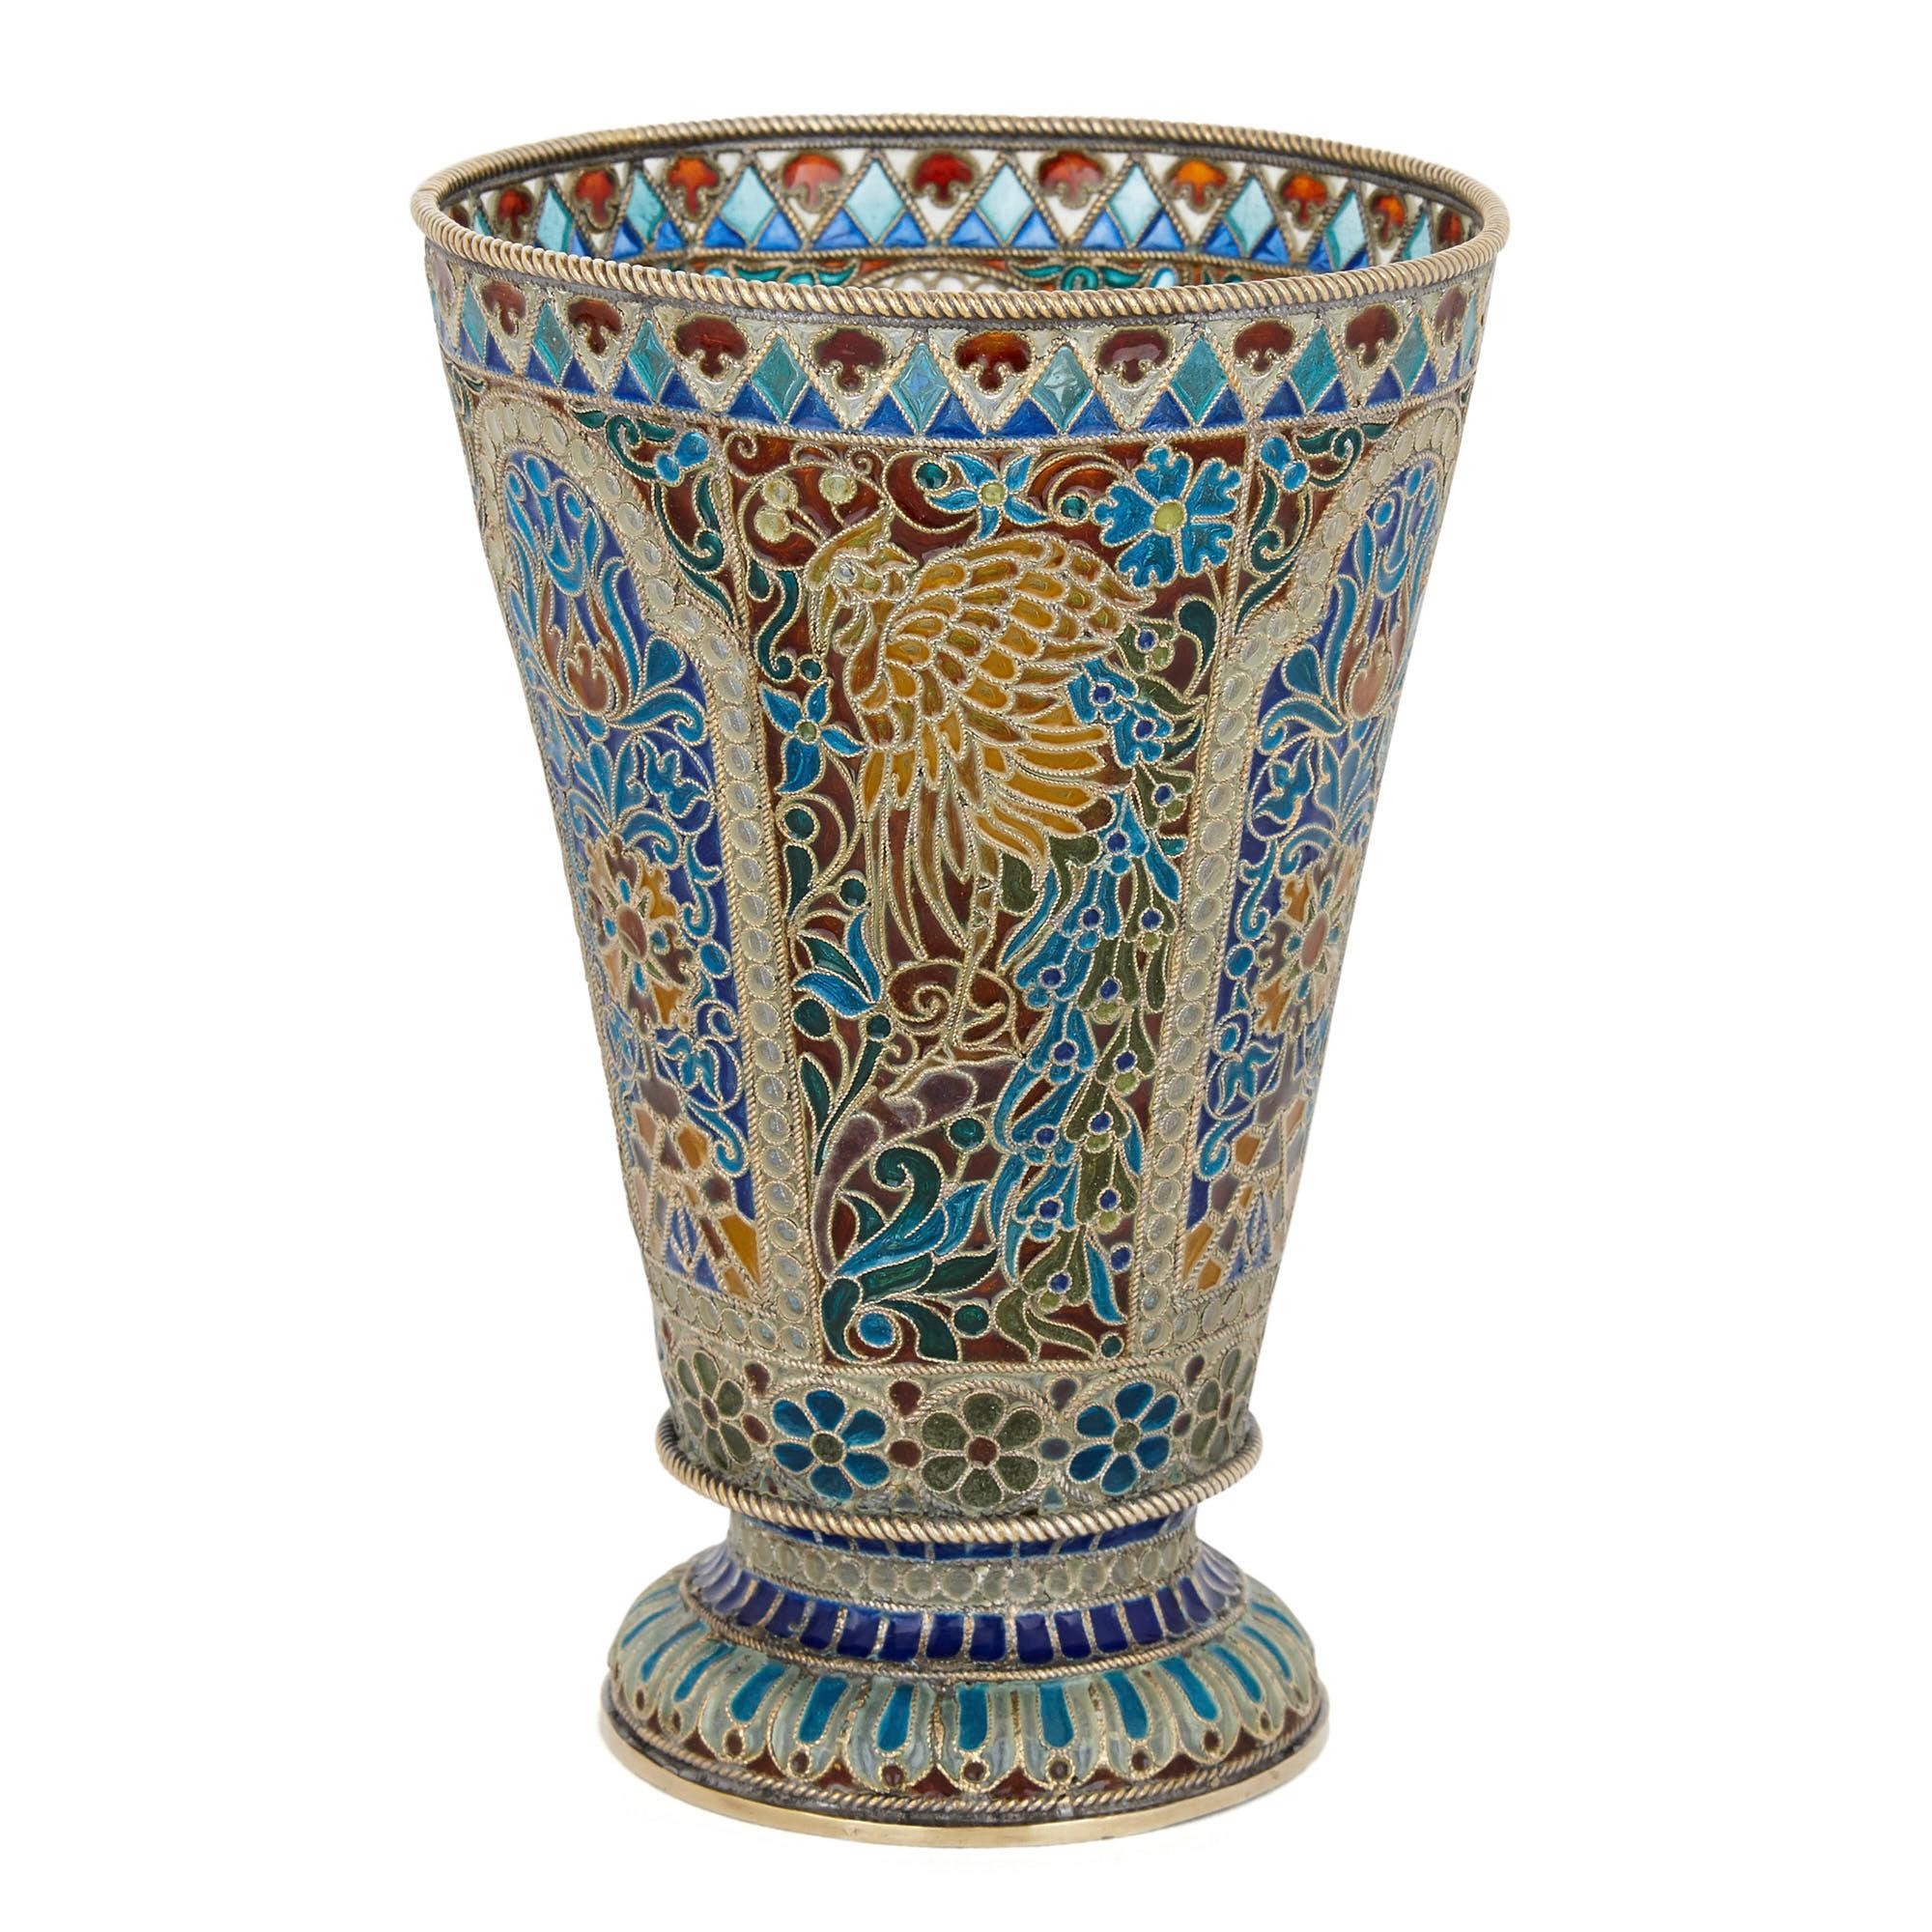 This Russian decorative beaker is crafted from vermeil (silver-gilt) and plique-à-jour enamel. The cylindrical beaker tapers from top to bottom, the body of the beaker formed from filaments of Fine twisted vermeil wire, between which is inset clear,